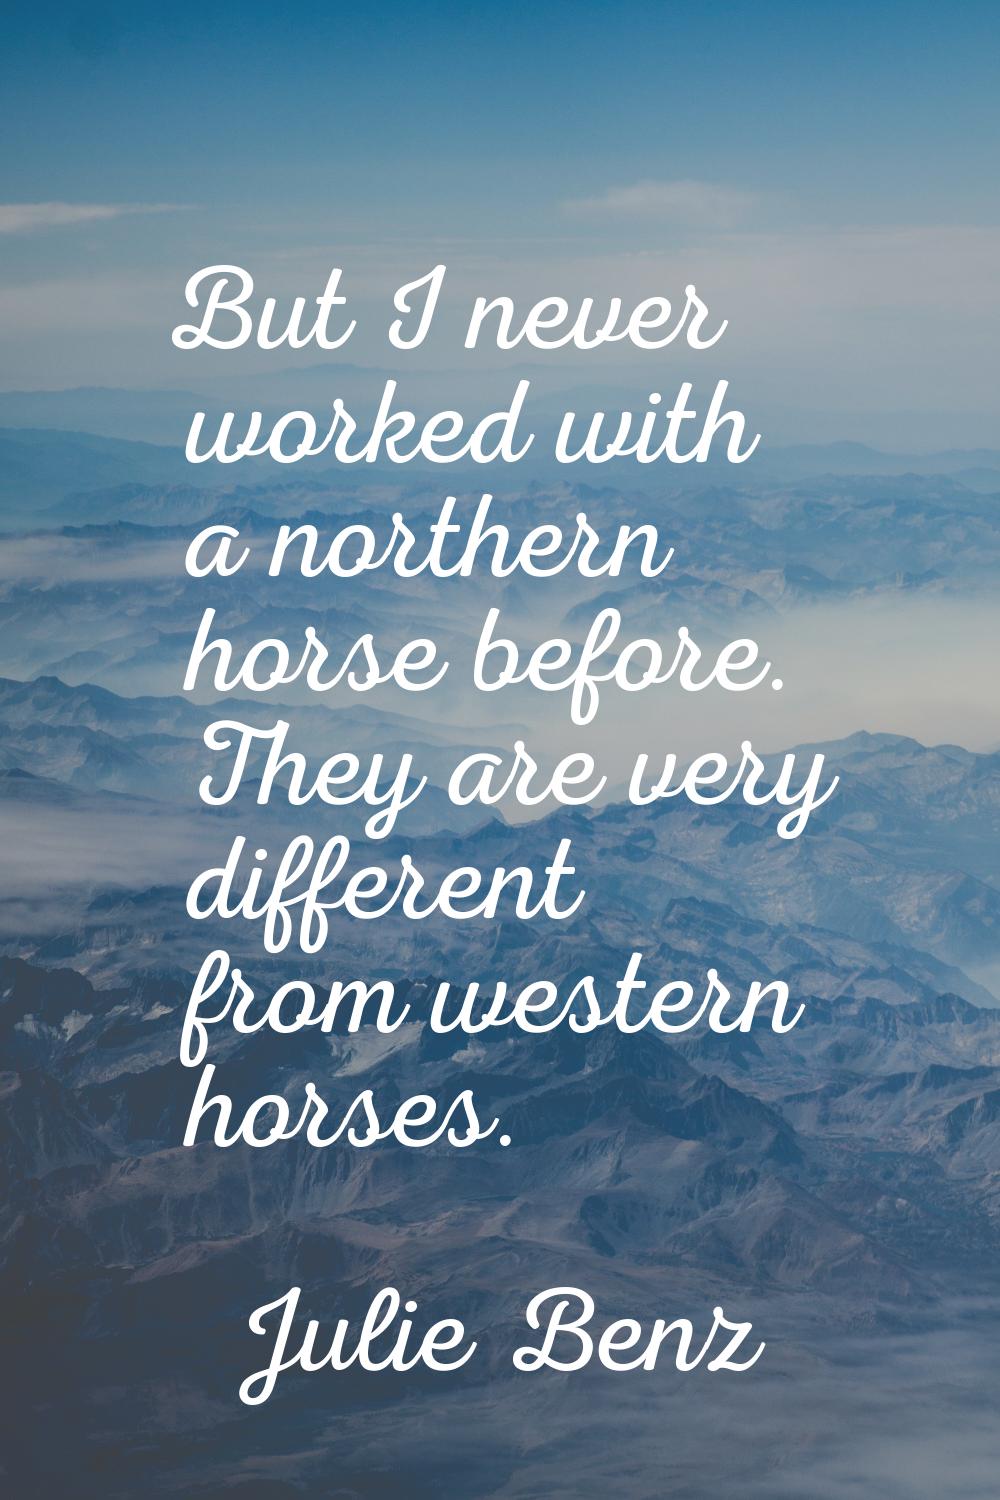 But I never worked with a northern horse before. They are very different from western horses.